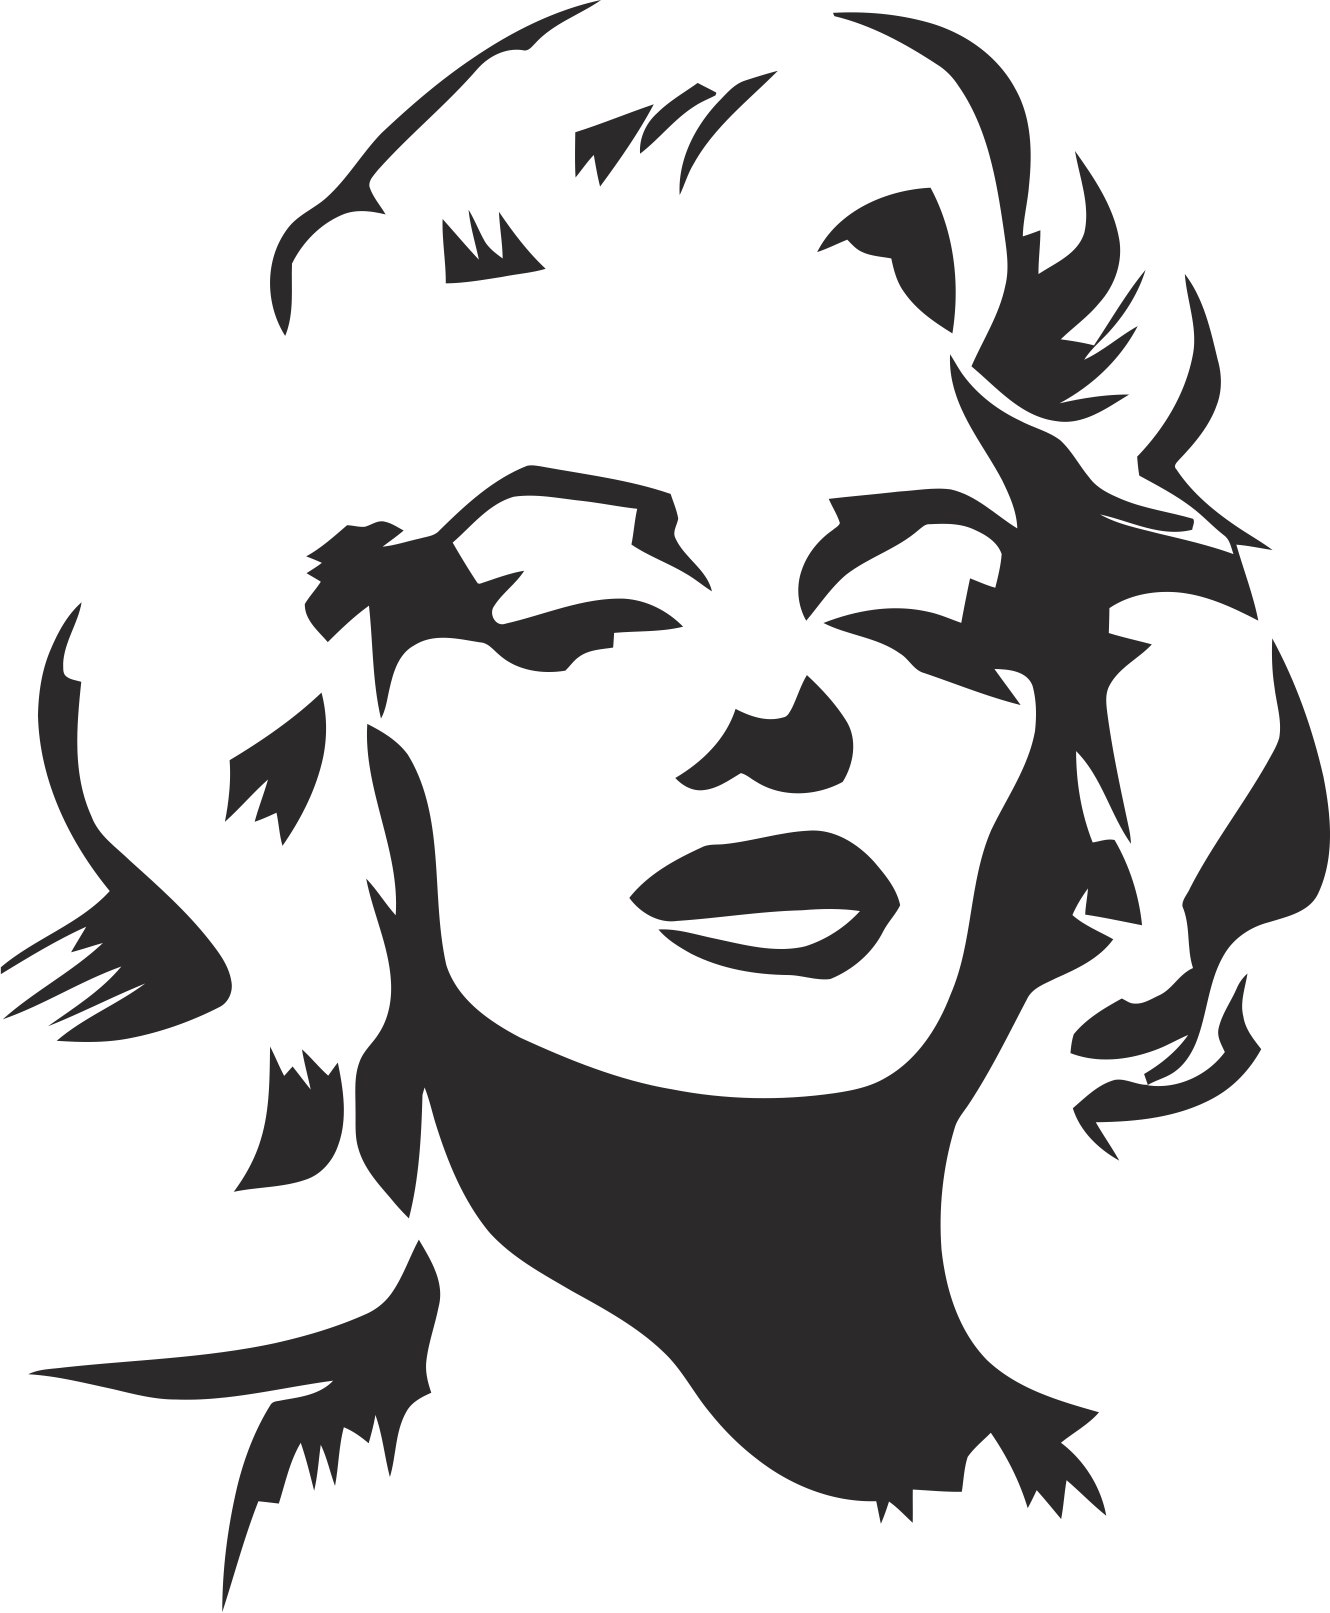 Marilyn Monroe Stencil (.eps) Free Vector Download - 3axis.co